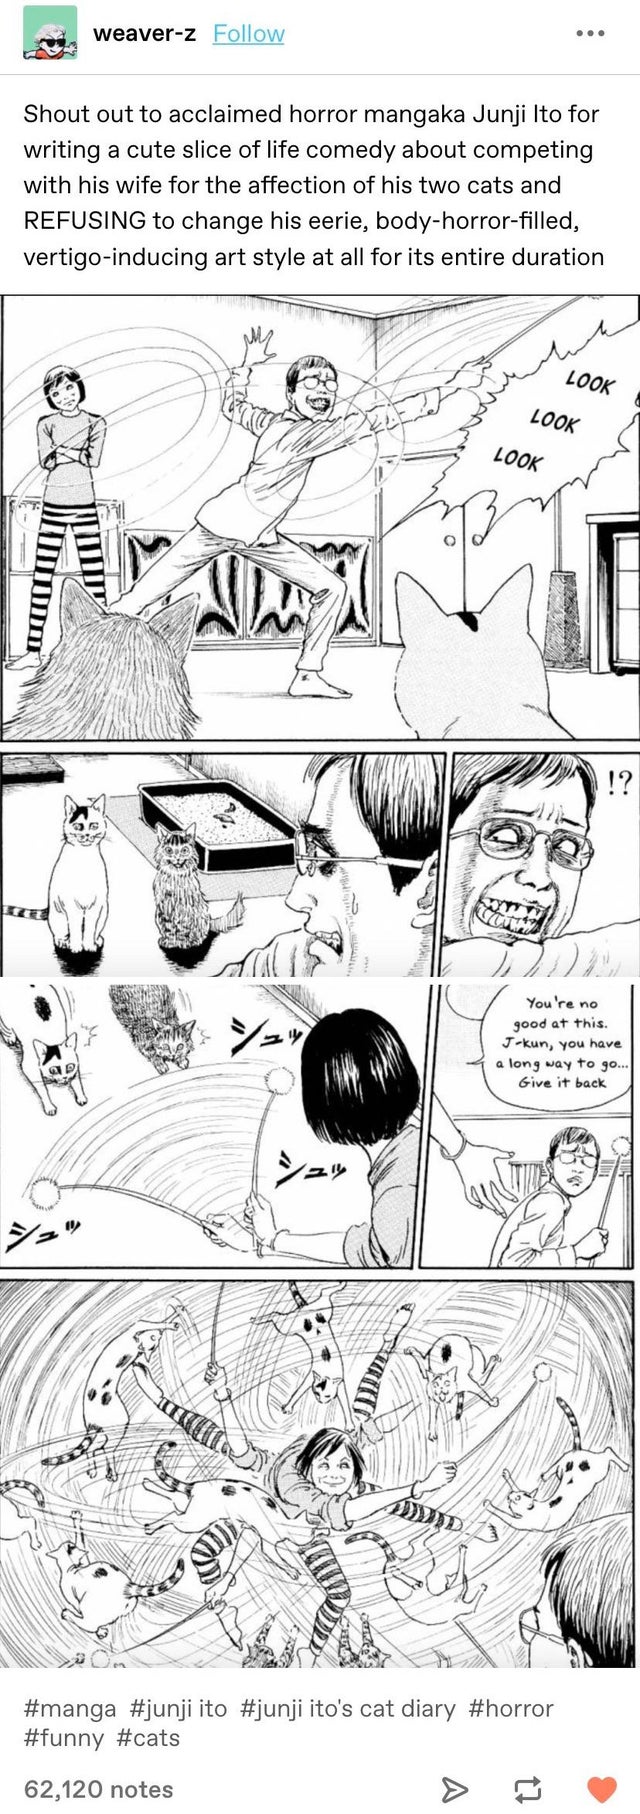 cartoon - weaverz Shout out to acclaimed horror mangaka Junji Ito for writing a cute slice of life comedy about competing with his wife for the affection of his two cats and Refusing to change his eerie, bodyhorrorfilled, vertigoinducing art style at all 